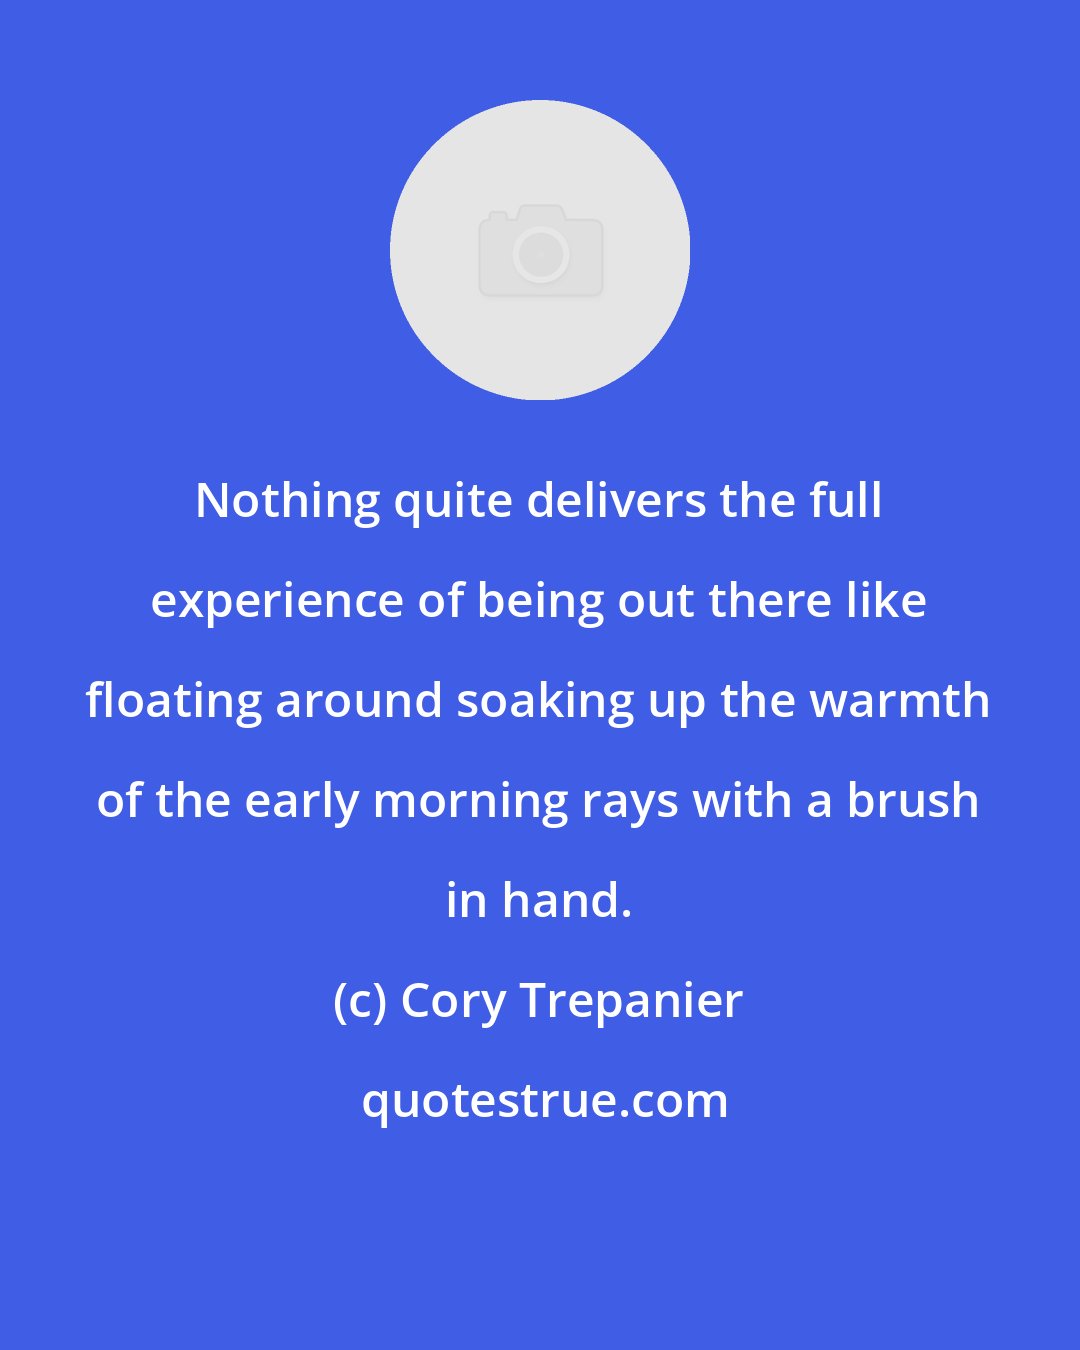 Cory Trepanier: Nothing quite delivers the full experience of being out there like floating around soaking up the warmth of the early morning rays with a brush in hand.